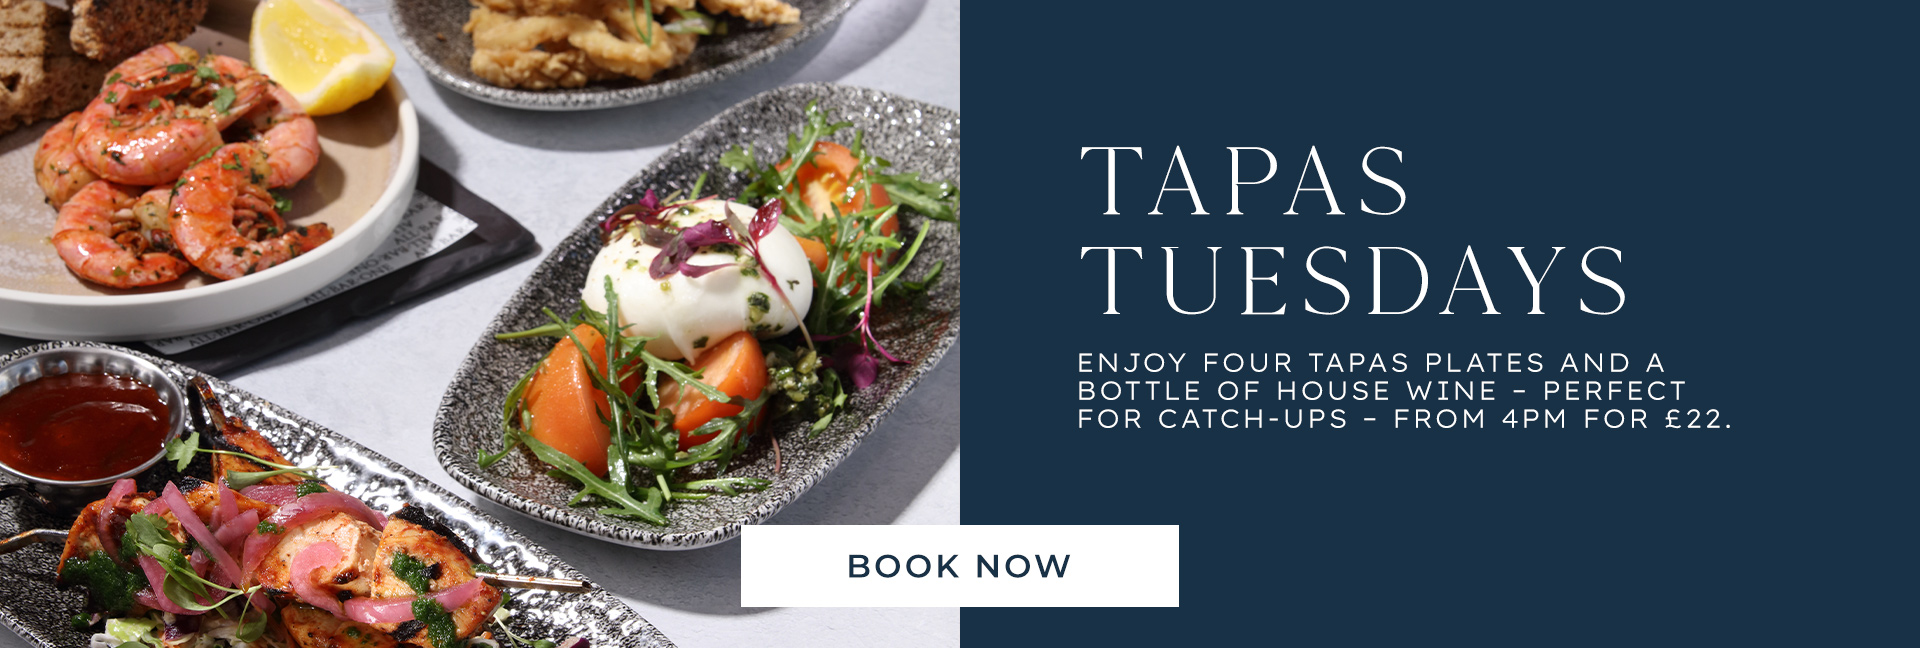 Tapas Tuesday at All Bar One Stratford Upon Avon - Book now